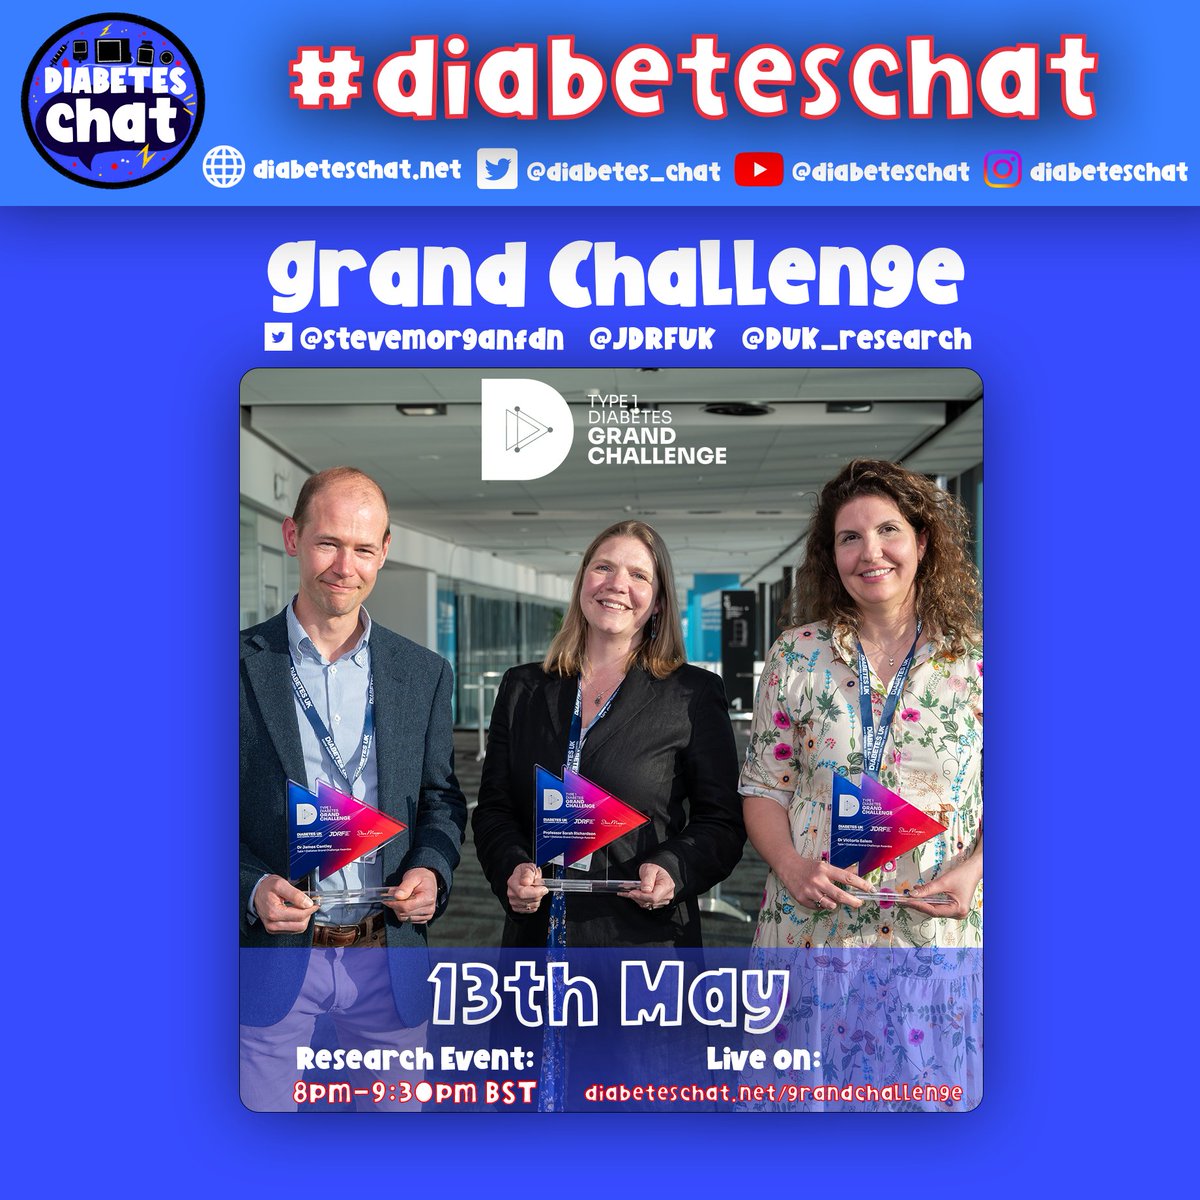 There’s just 1 week to go until #Type1GrandChallenge Senior Research Fellows, @JamesCantleyLab, @SarahIBEx and Dr Vicky Salem join @welshy_89 on @diabetes_chat! 🤩 👏 Join the event on Monday 13 May, 8pm-9.30pm. More info in the image! #GBDoc #DiabetesChat